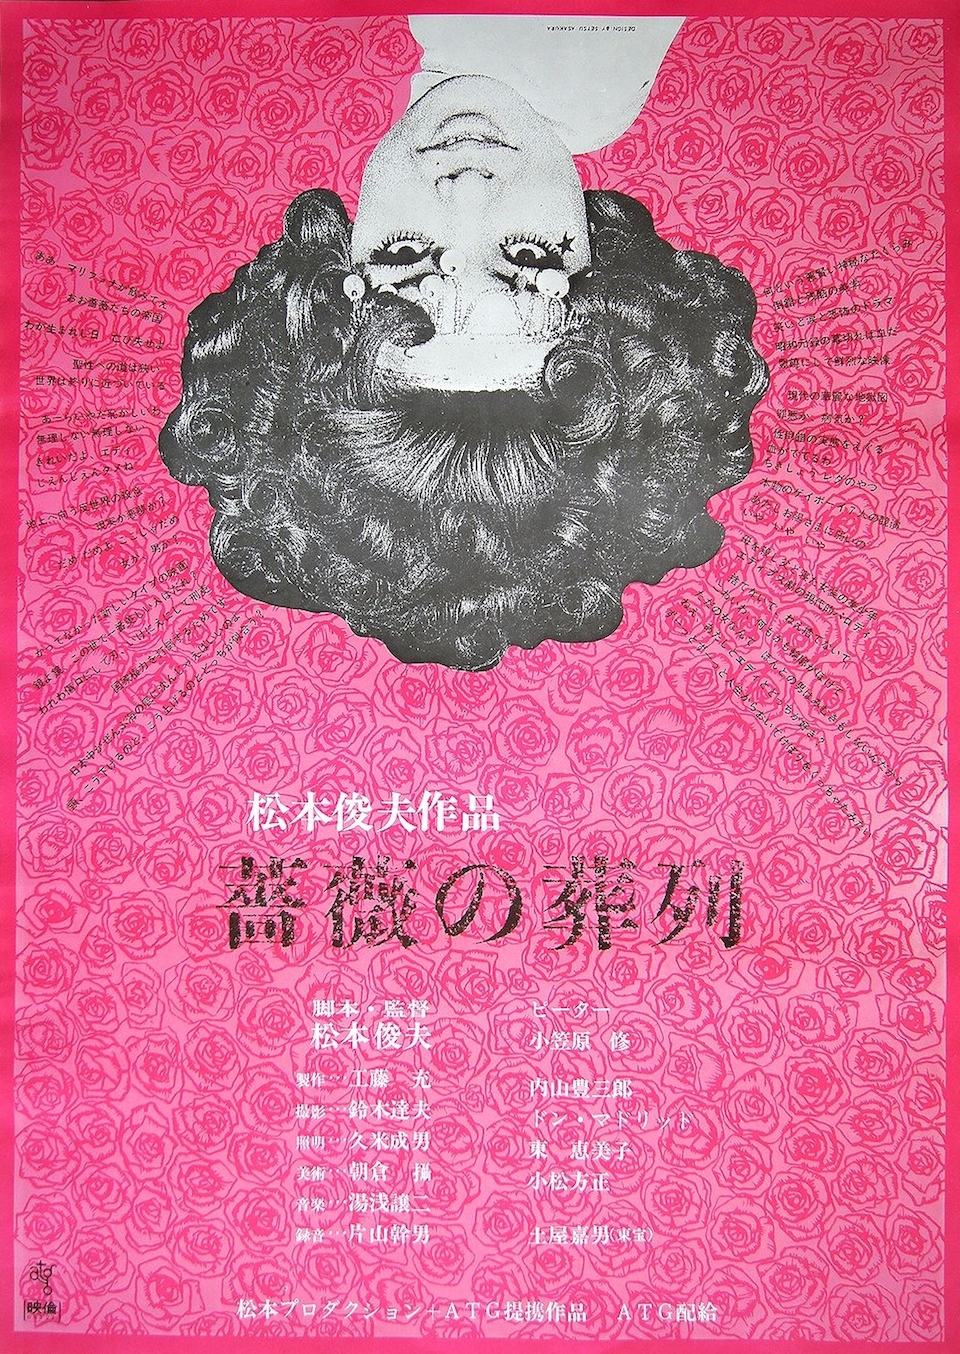 funeral-parade-of-roses-poster